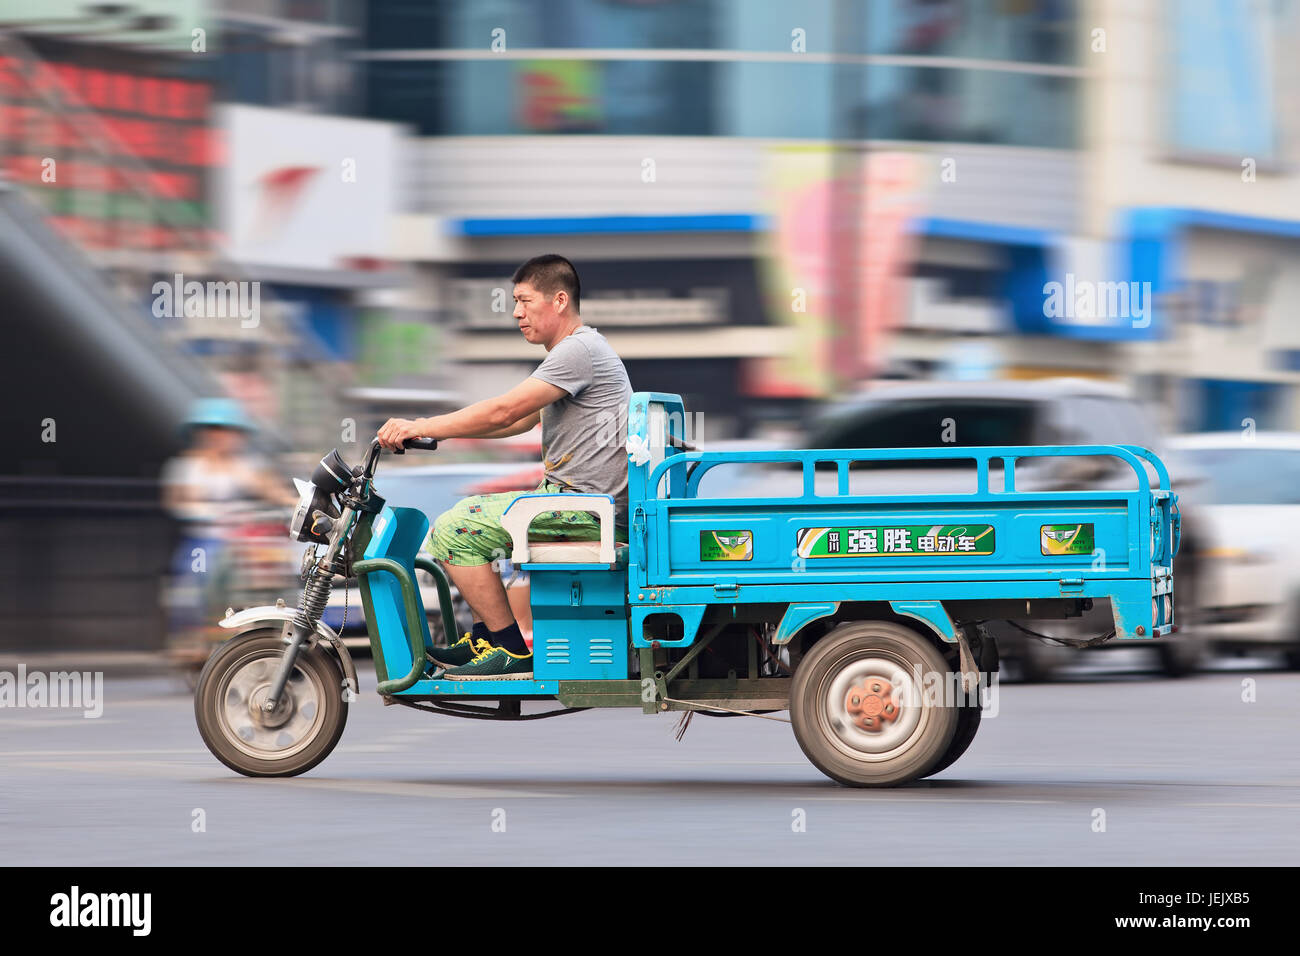 BEIJING-JULY 27, 2015. Man on electric freight tricycle in Beijing downtown. The police in major Chinese cities crackdown on unlicensed electric bikes. Stock Photo